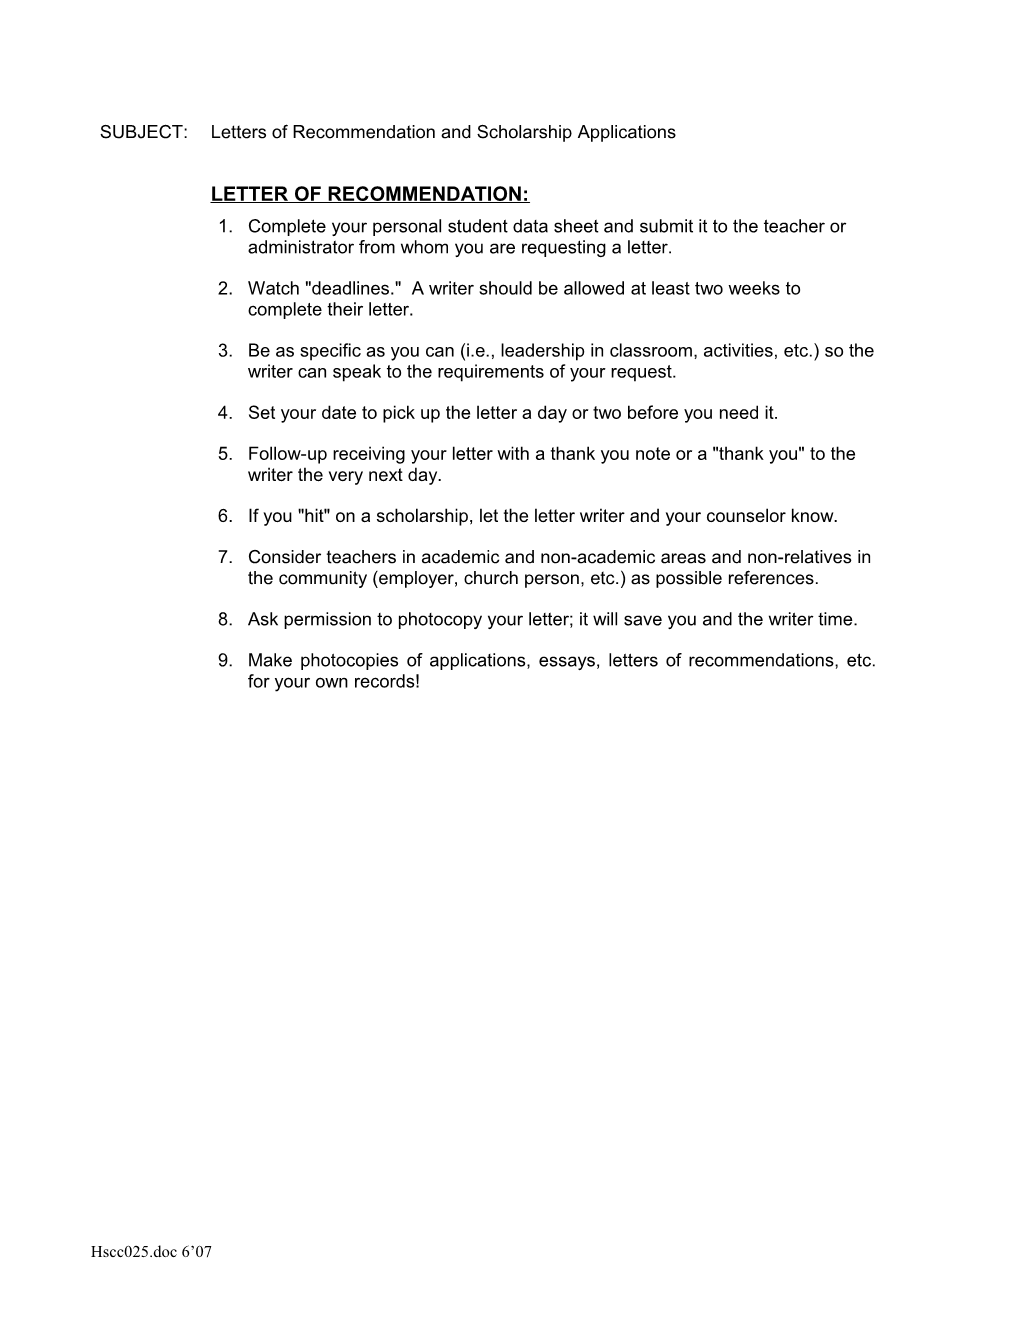 Letter of Recommd